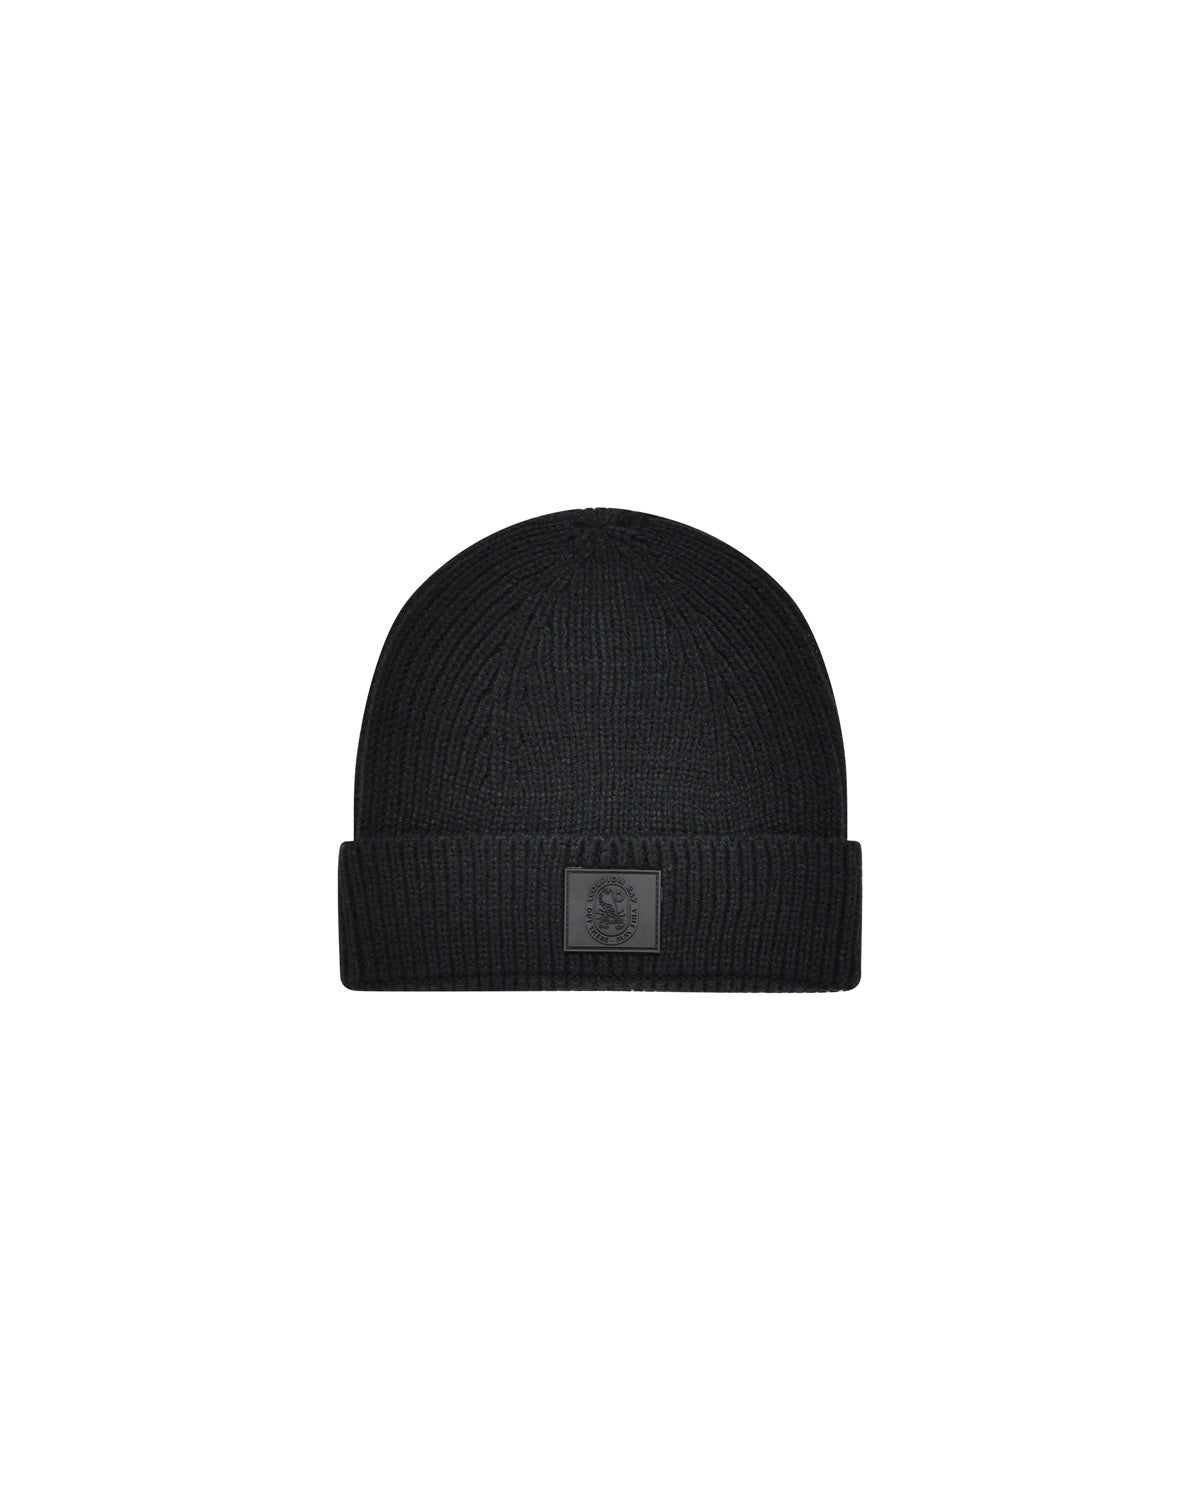 Short hat in black ribbed knit with logo patch